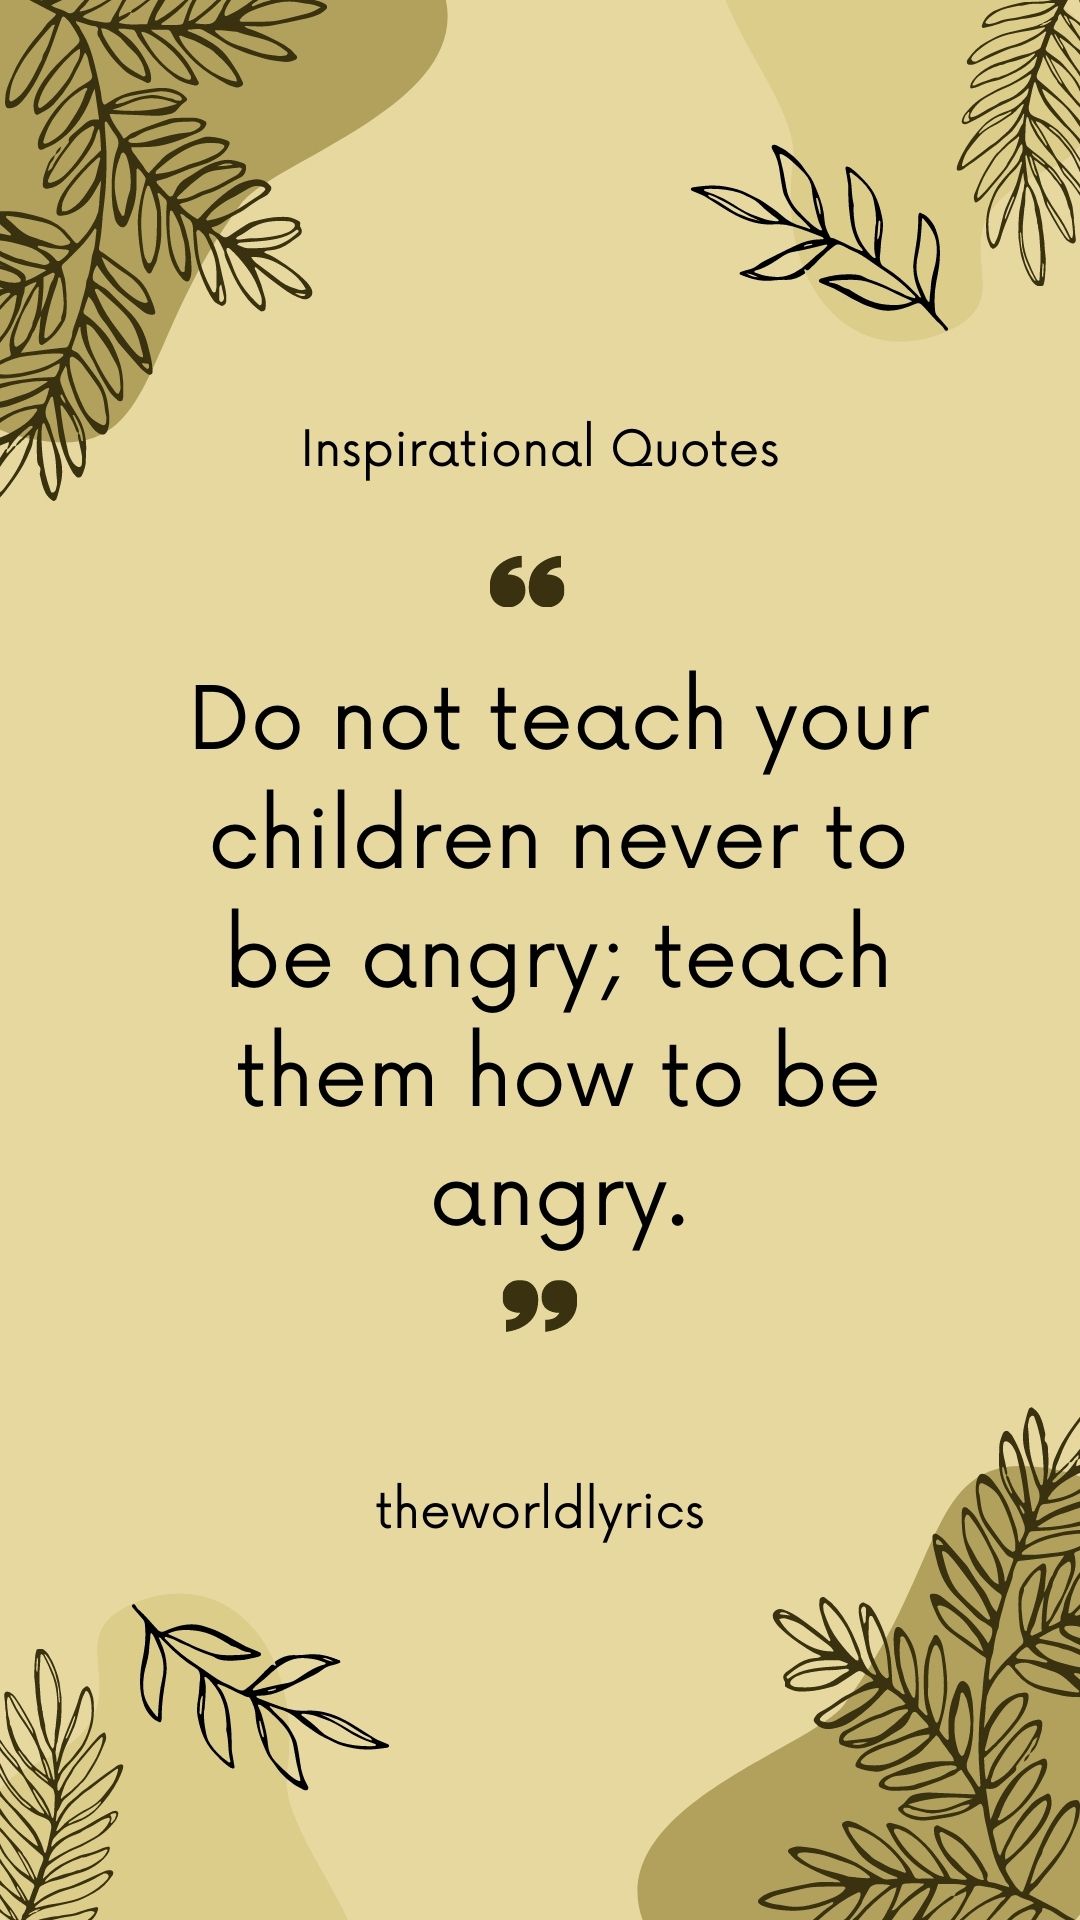 Do not teach your children never to be angry teach them how to be angry